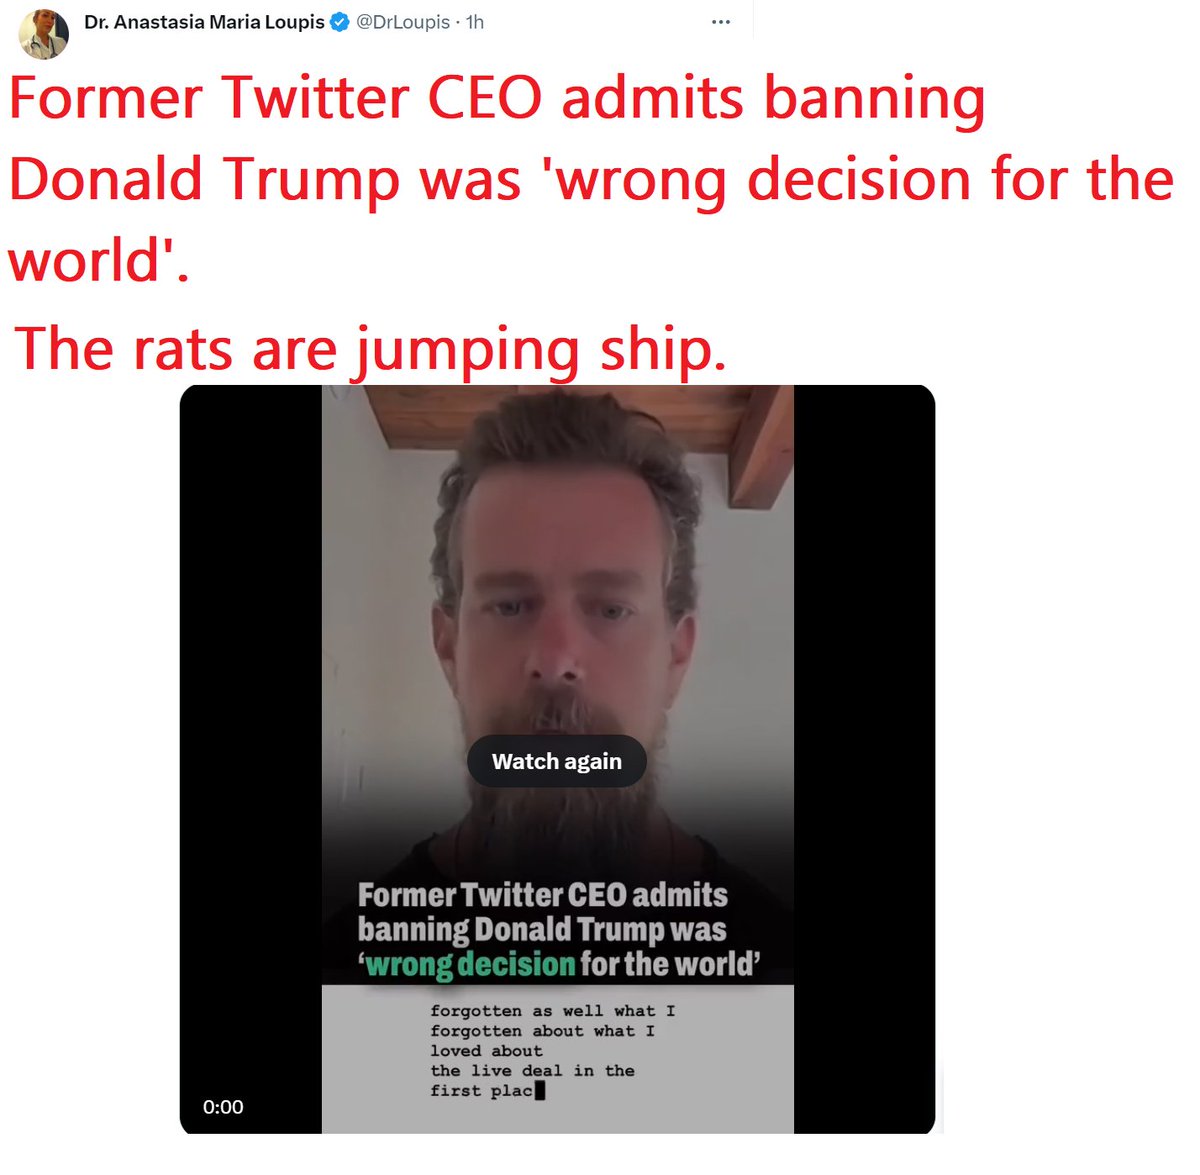 🇺🇸❤️PATRIOT FOLLOW TRAIN❤️🇺🇸 🇺🇸❤️HAPPY SATURDAY !❤️🇺🇸 🇺🇸❤️DROP YOUR HANDLES ❤️🇺🇸 🇺🇸❤️FOLLOW OTHER PATRIOTS❤️🇺🇸 🔥❤️LIKE & RETWEET IFBAP❤️🔥 🇺🇸❤️PRAY FOR TRUMP❤️🇺🇸 Former Twitter CEO admits banning Donald Trump was 'wrong decision for the world'. The rats are jumping…